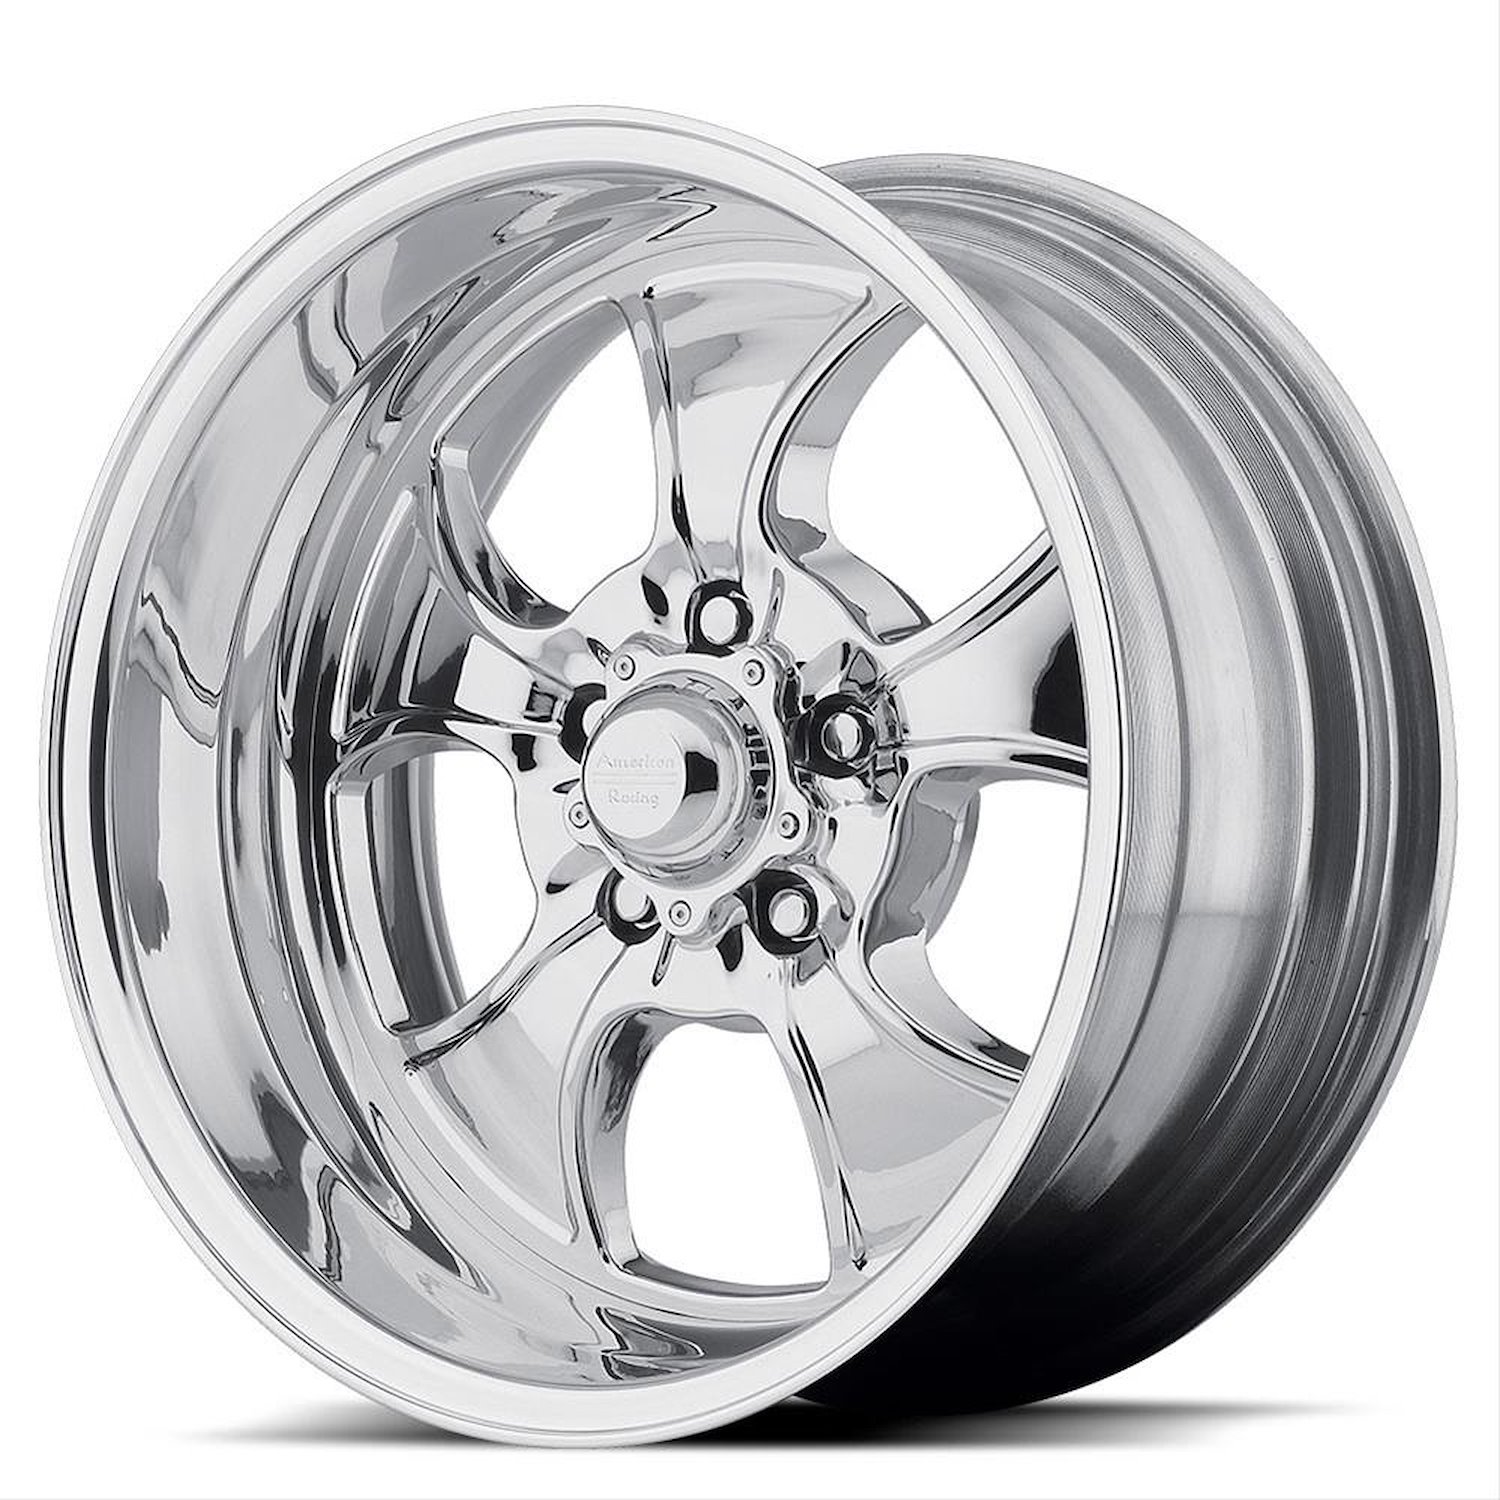 AMERICAN RACING HOPSTER TWO-PIECE POLISHED 15 x 8 5X5.0 0 4.50